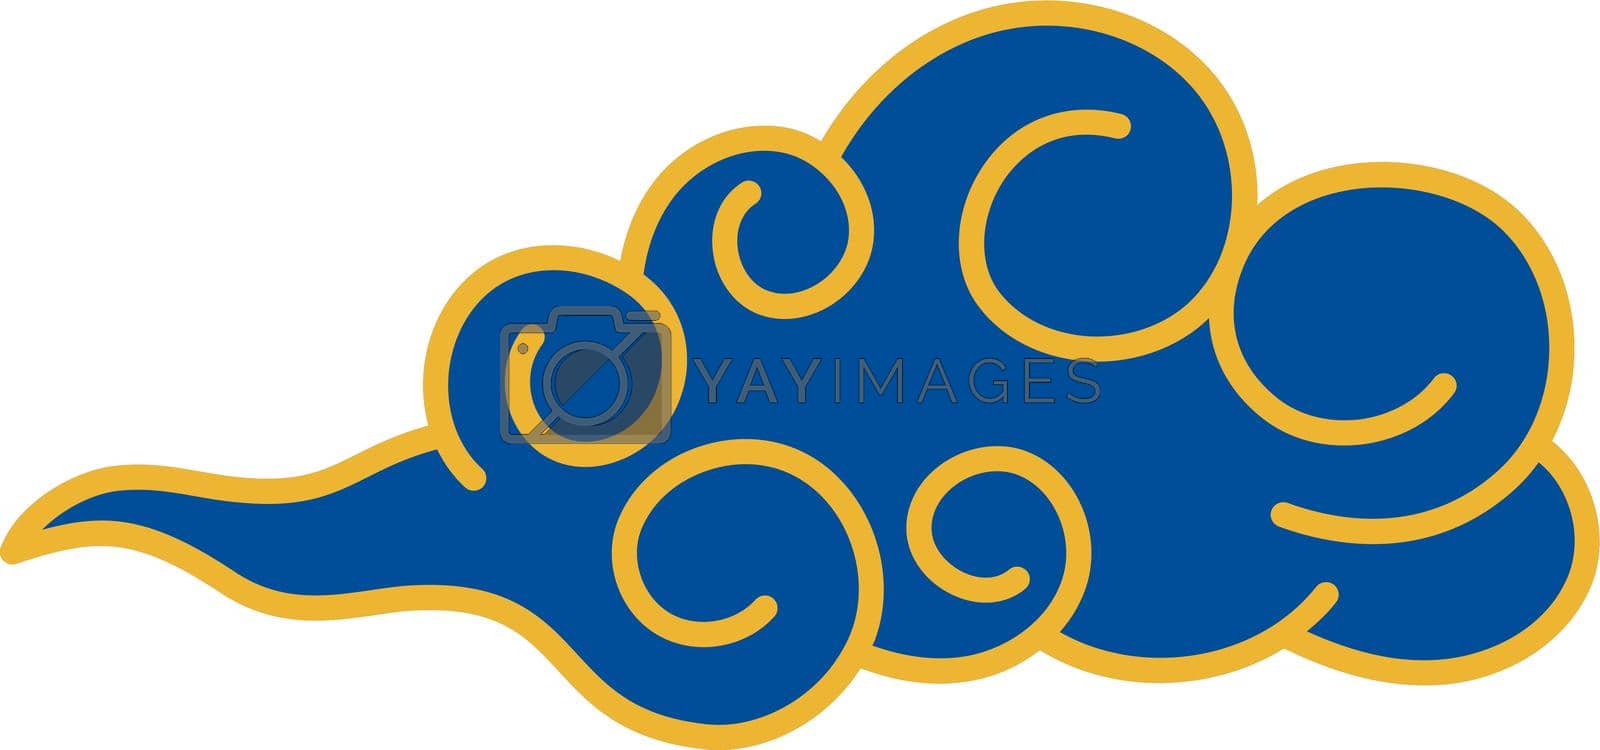 Royalty free image of Blue cloud. Sky element for traditional holiday ornament by LadadikArt